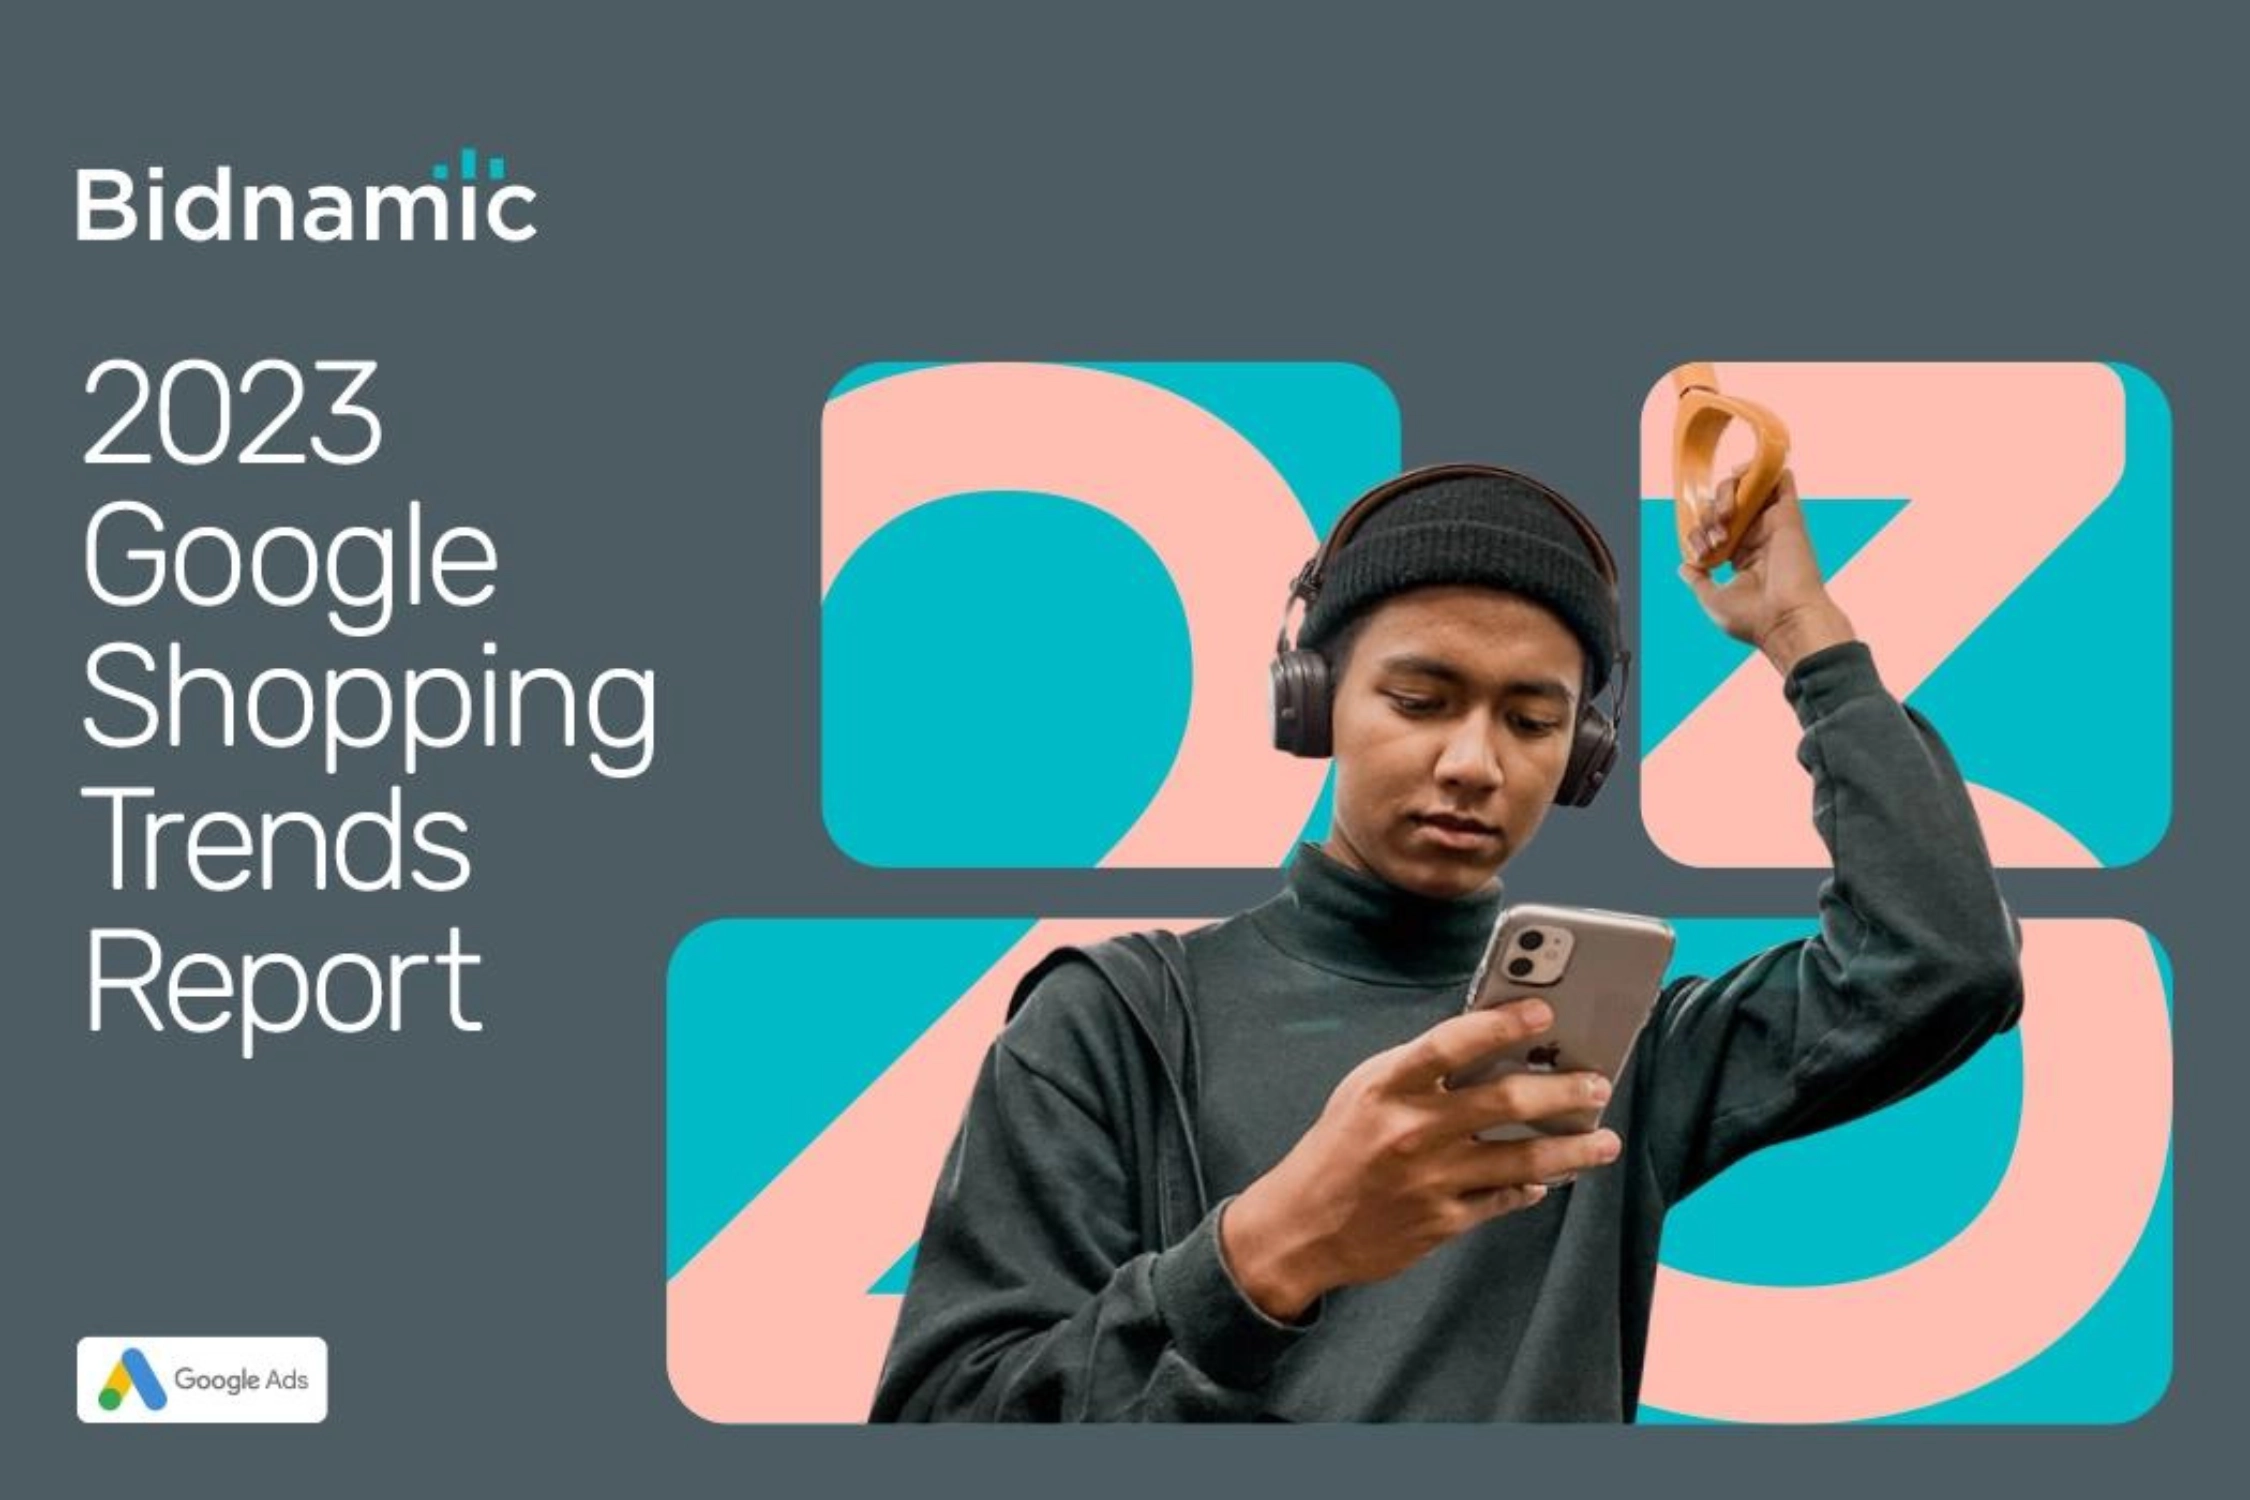 The 2023 Google Shopping Trends Report